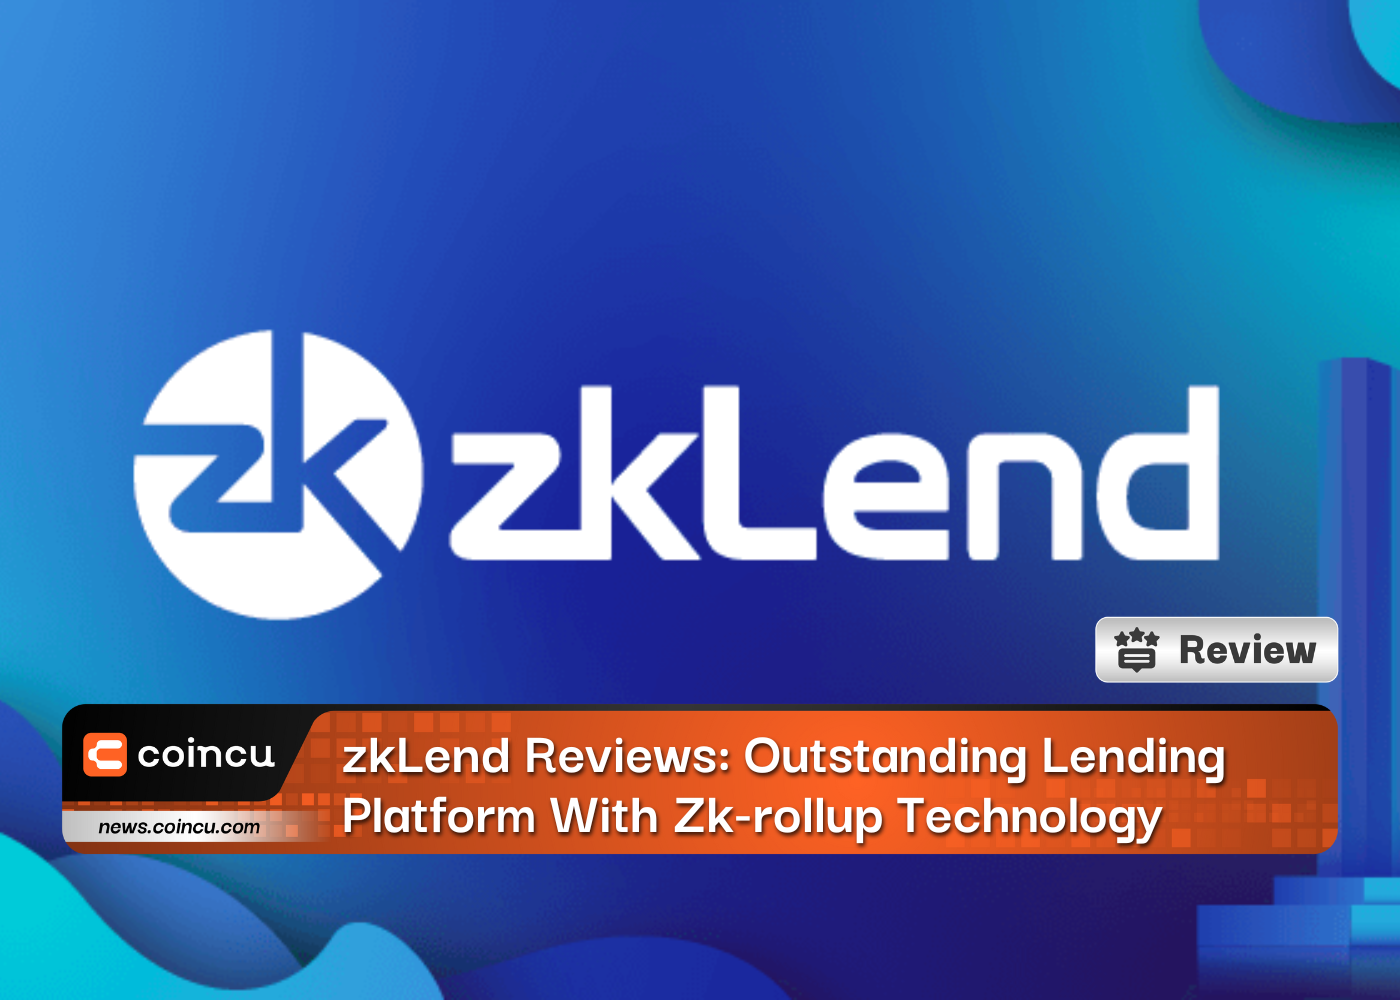 zkLend Reviews: Outstanding Lending Platform With Zk-rollup Technology